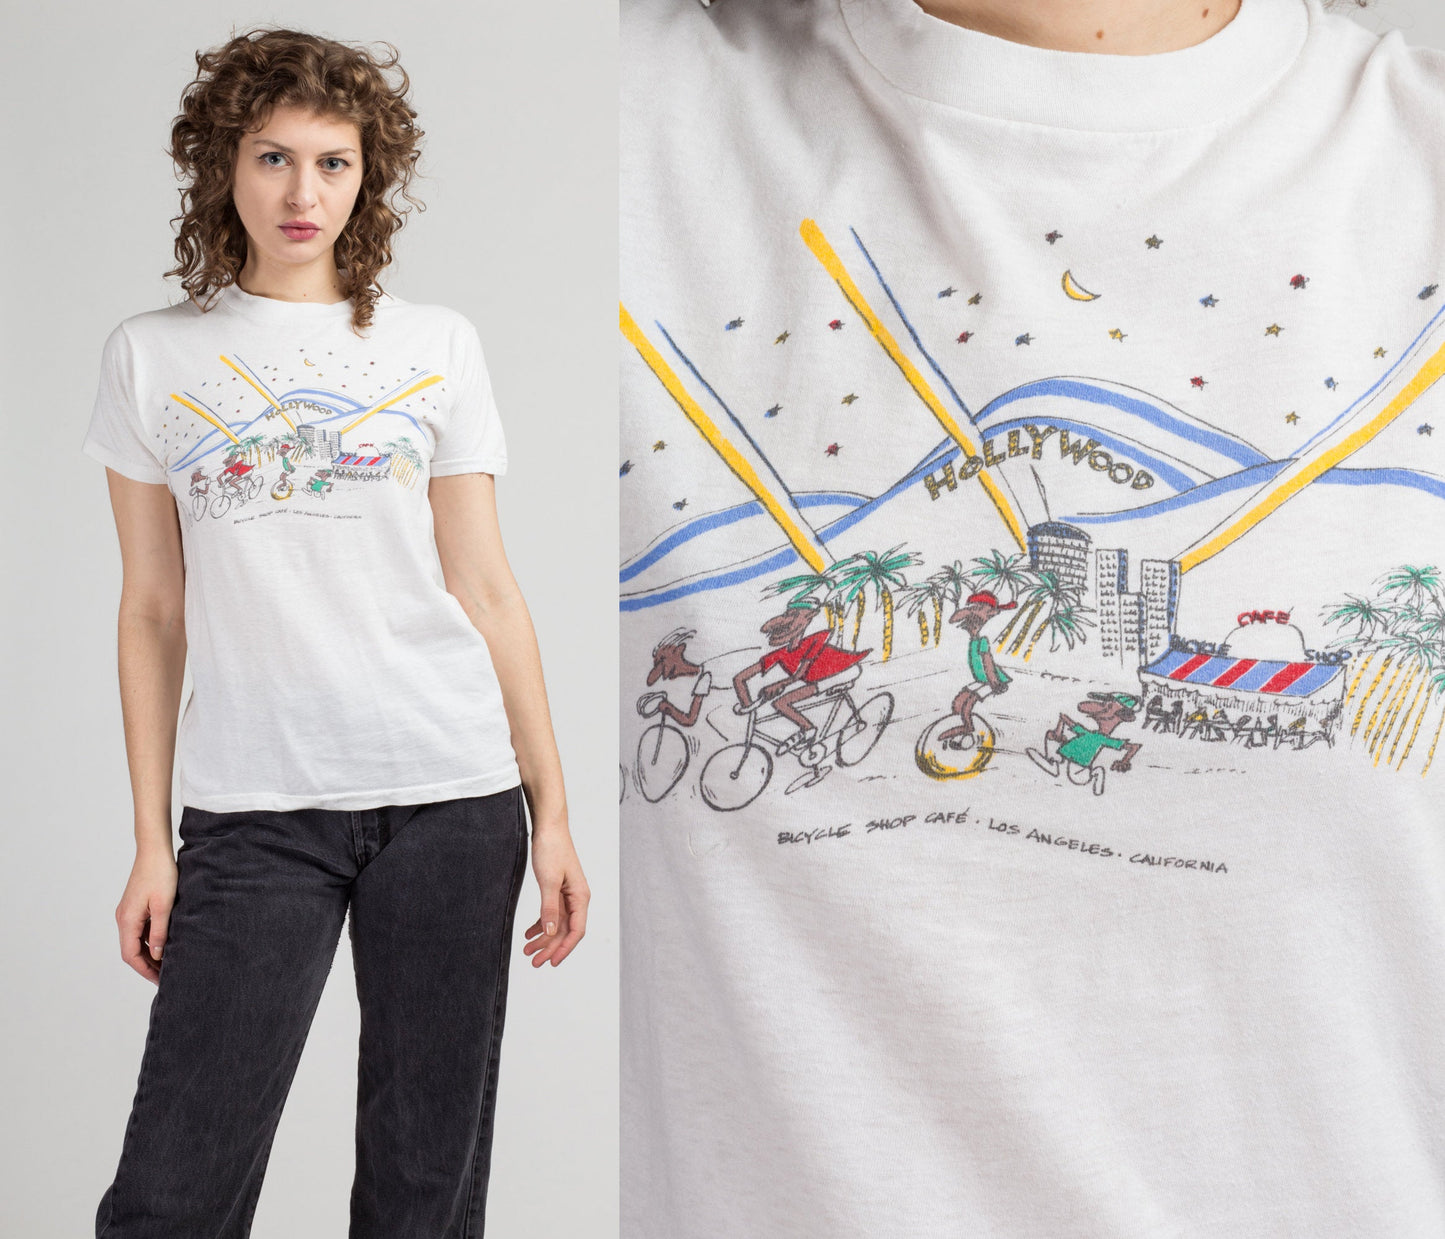 Vintage Hollywood Bicycle Shop Cafe T Shirt - Small to Medium | 80s White Graphic Los Angeles California Tourist Tee